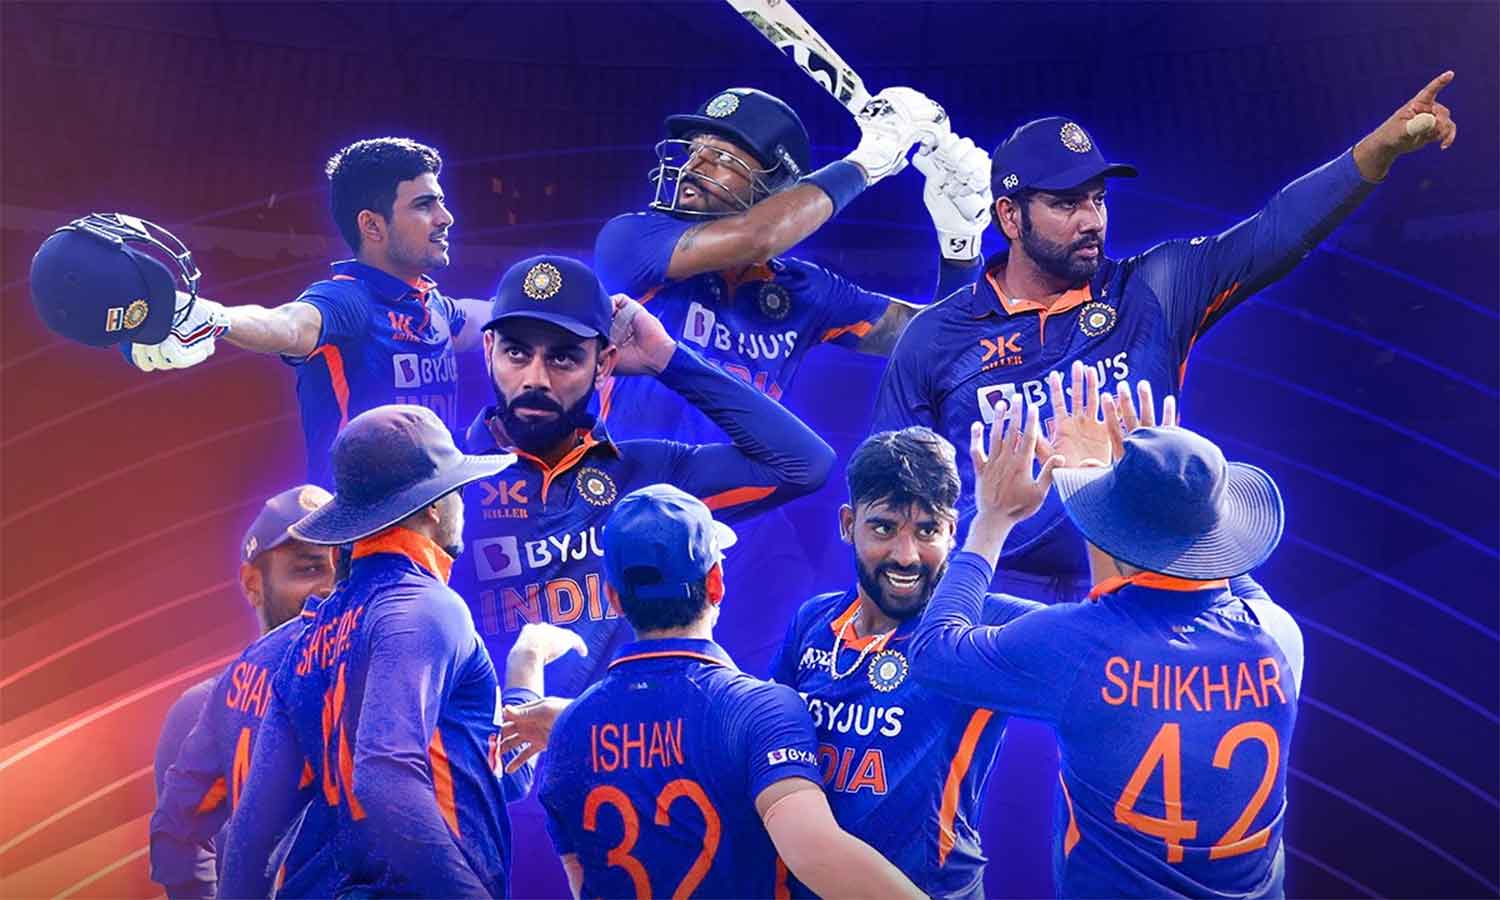 India has climbed to the top spot in the ICC ODI rankings